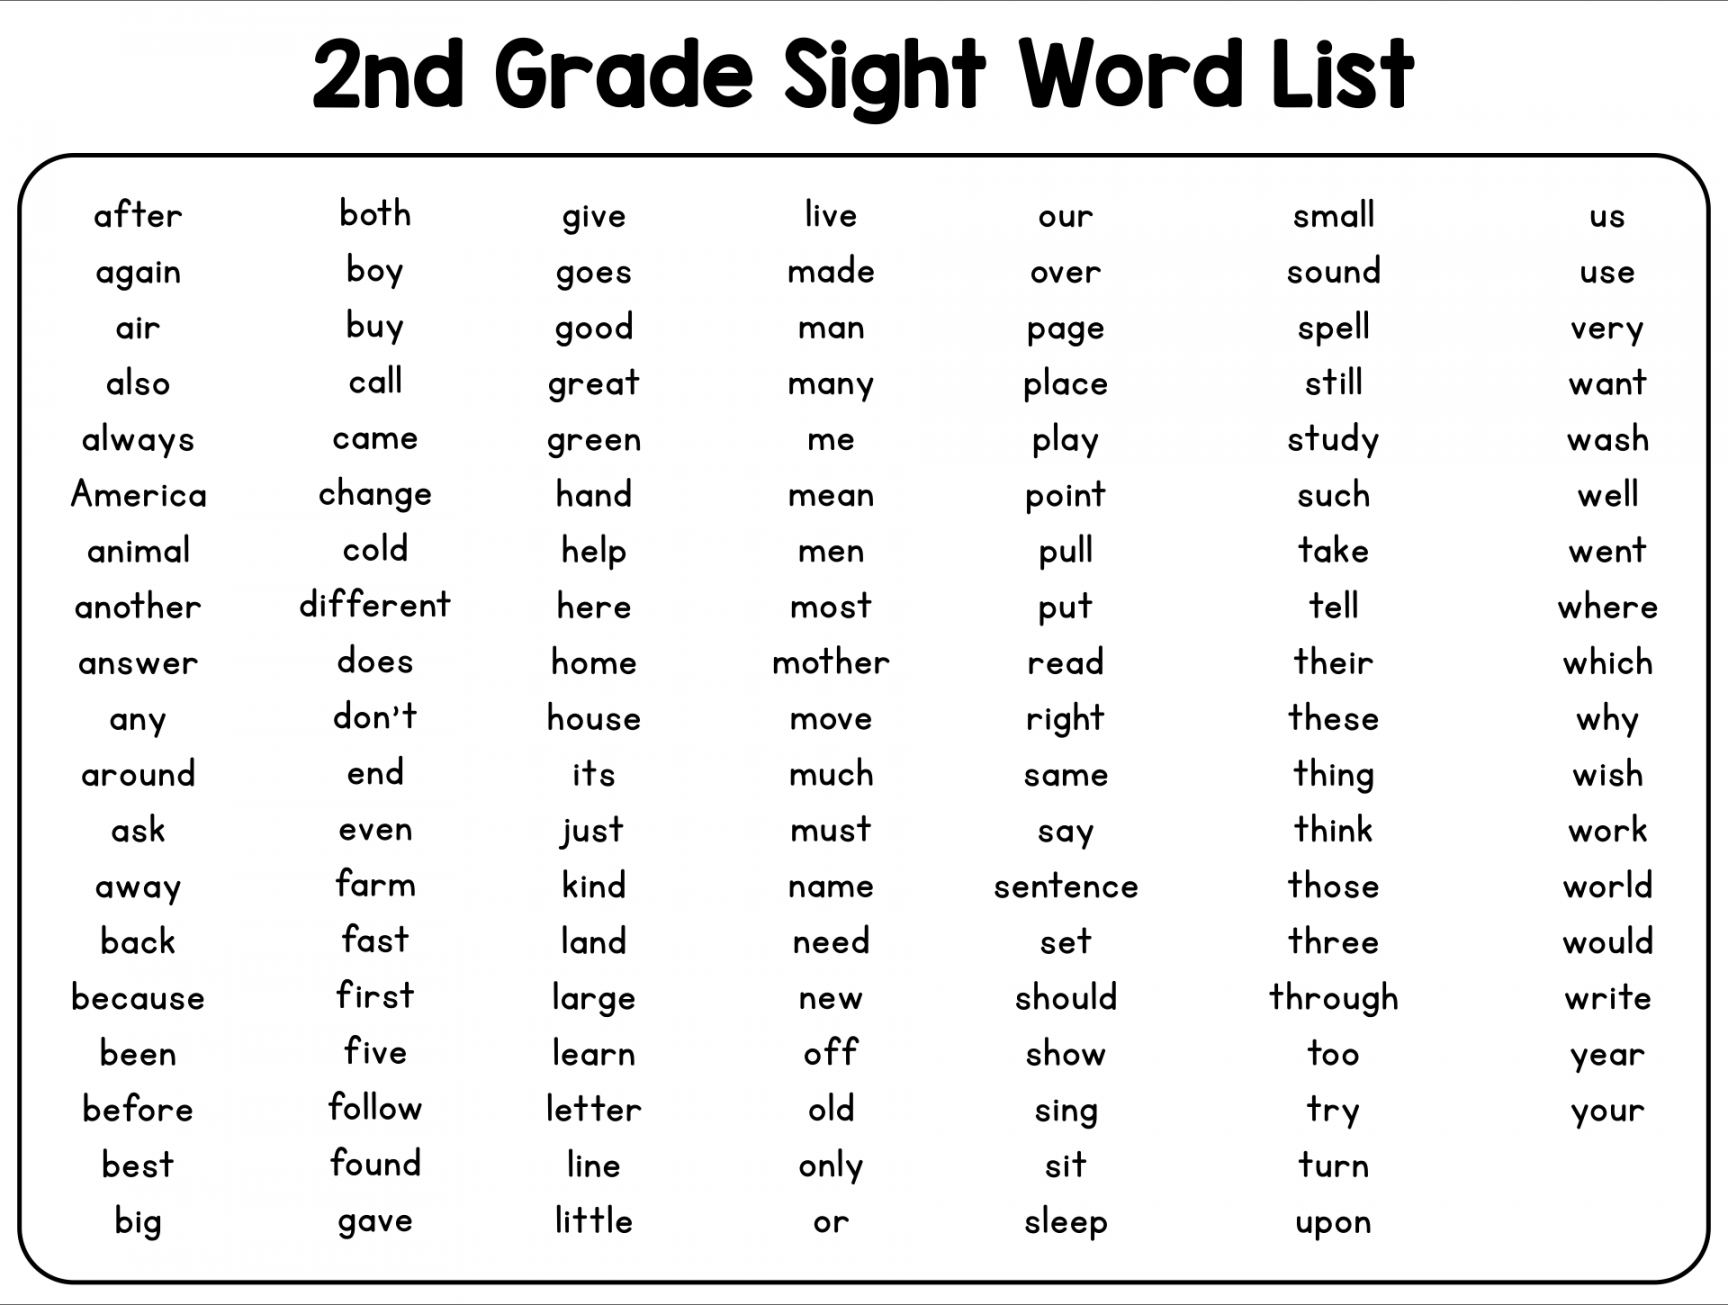 Best Second Grade Sight Words Printable - printablee - Free Printable 2nd Grade Sight Words